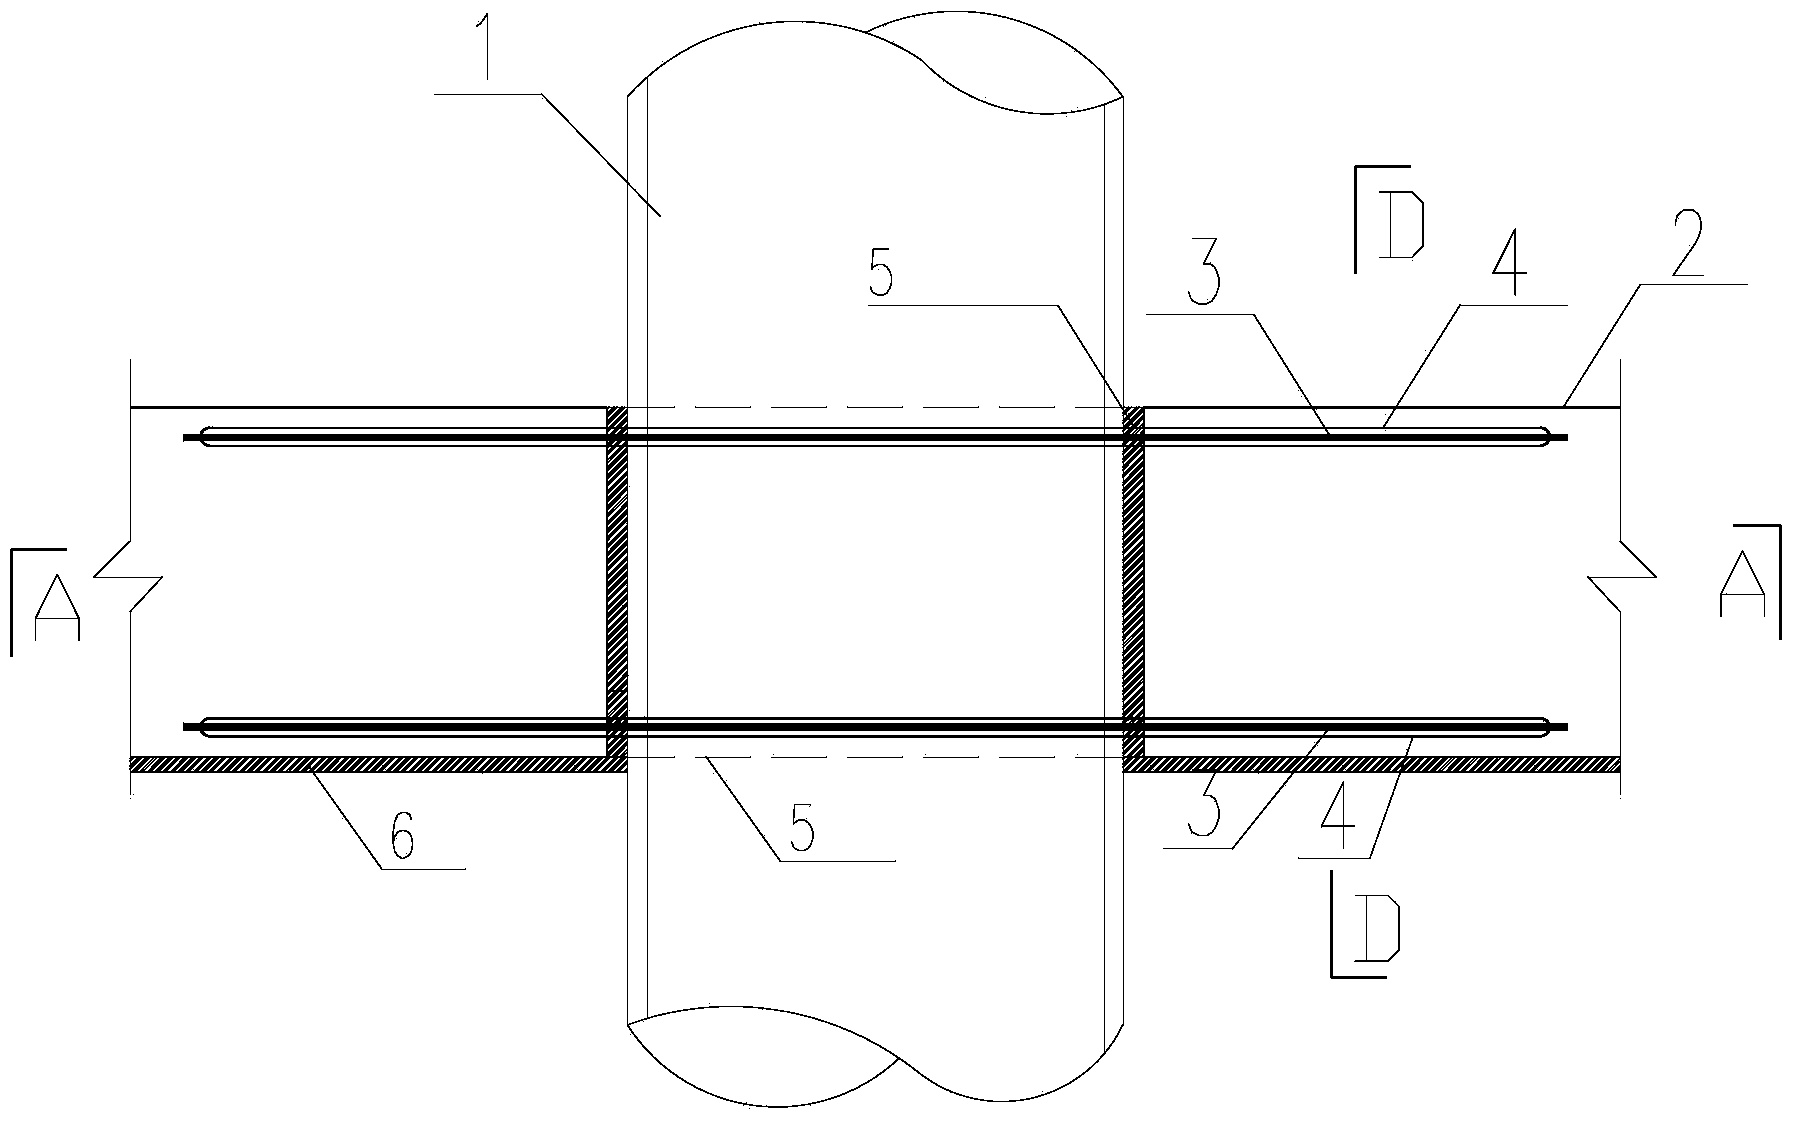 Node for connecting prefabricated concrete beam with round steel tube concrete column through unbonded prestressed ribs